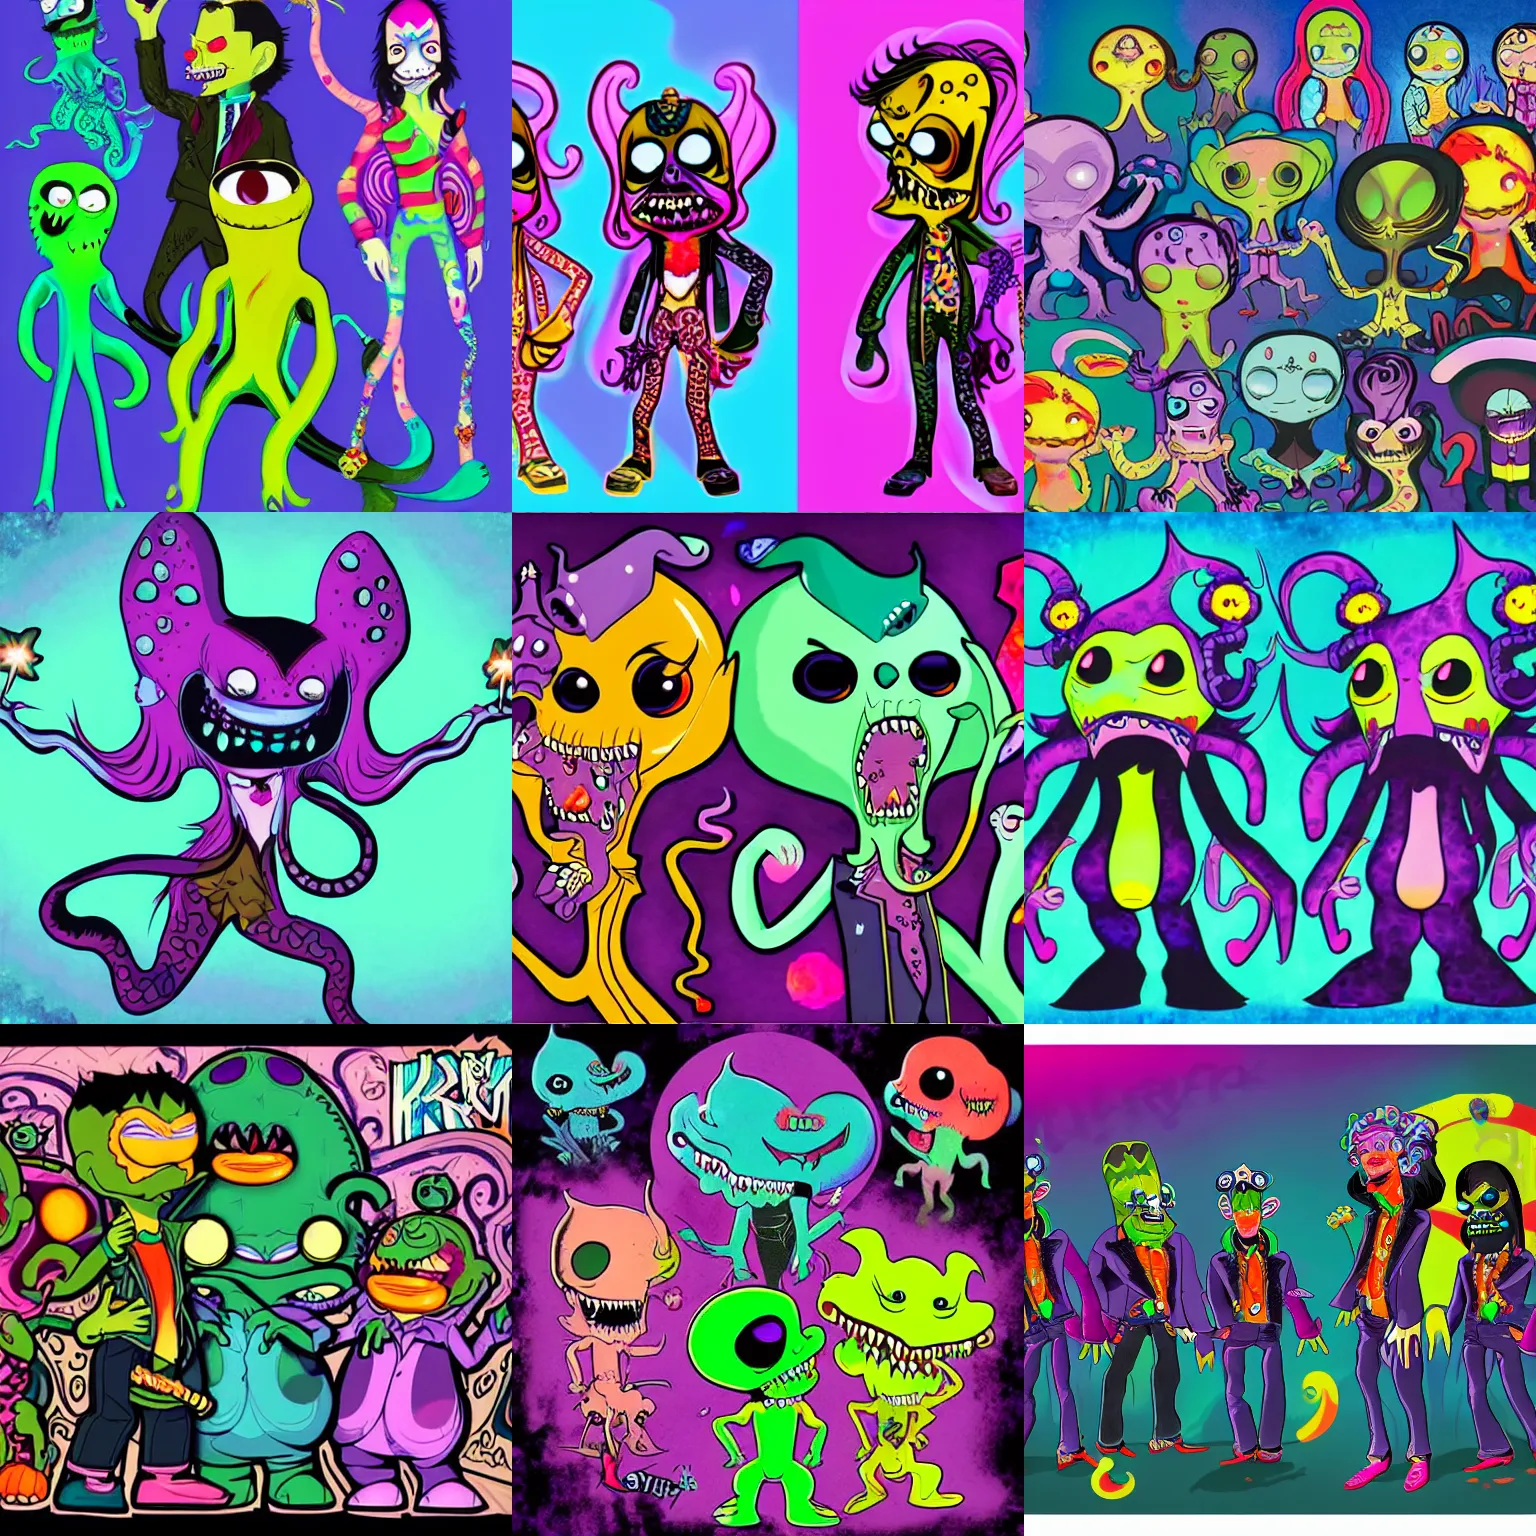 Prompt: Lisa frank vampire kraken based character designs for the newest psychonauts video game made by double fine done by tim shafer with help from the artist for the band gorrilaz